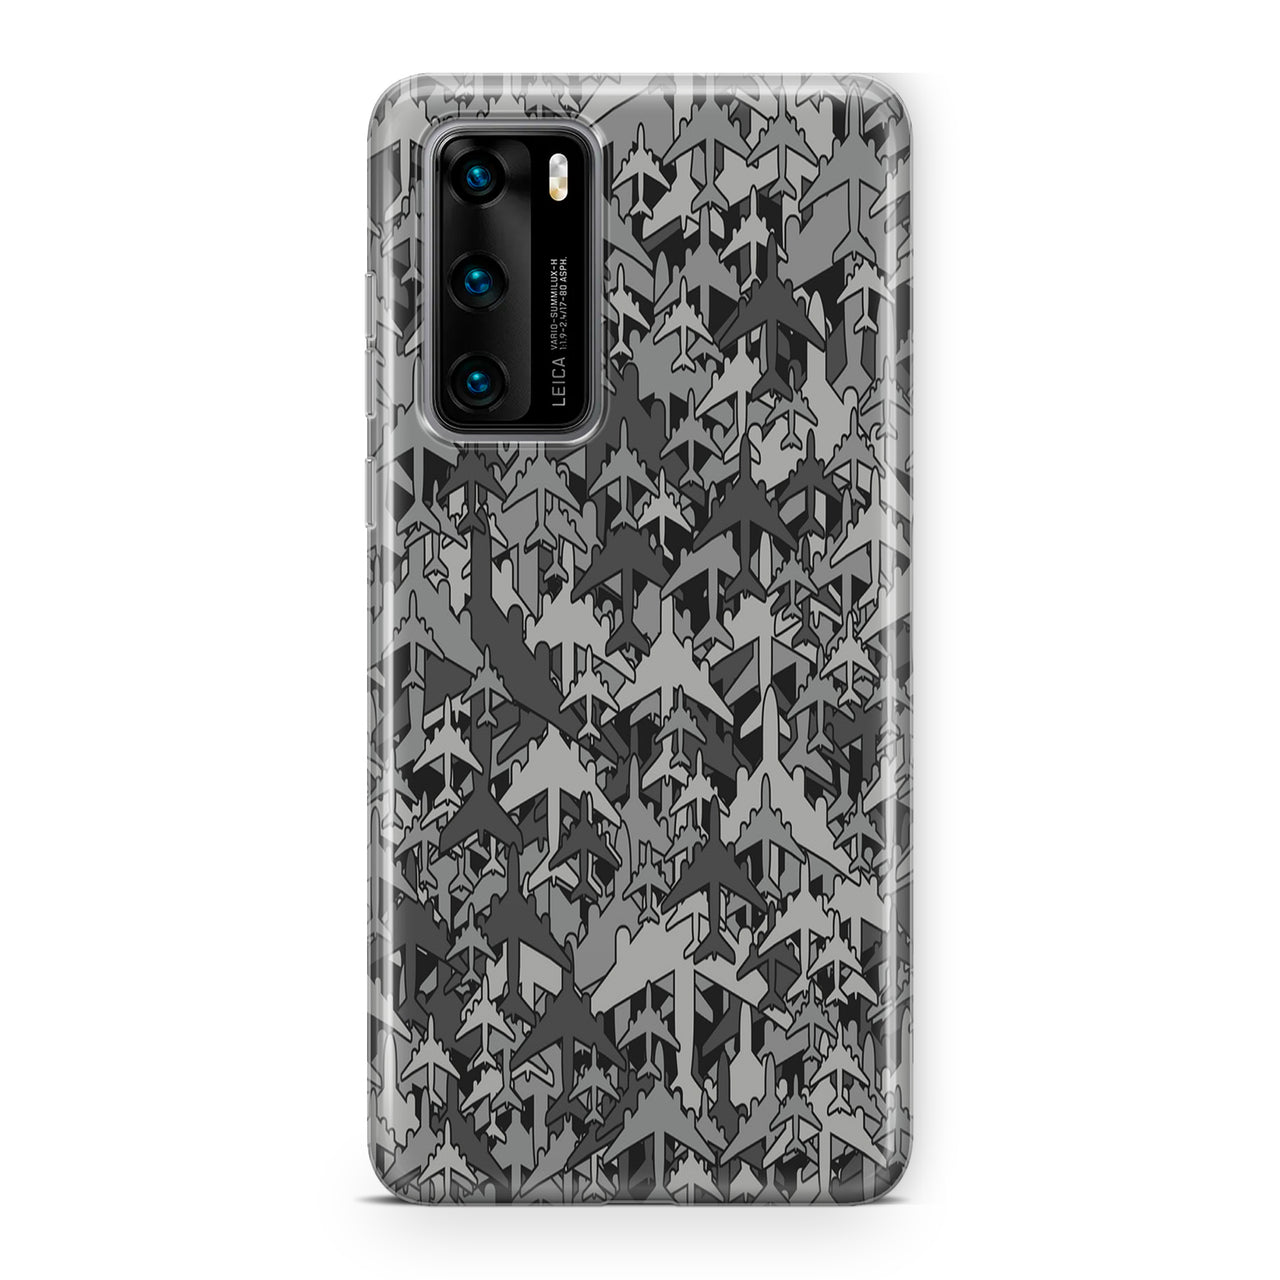 Dark Coloured Airplanes Designed Huawei Cases